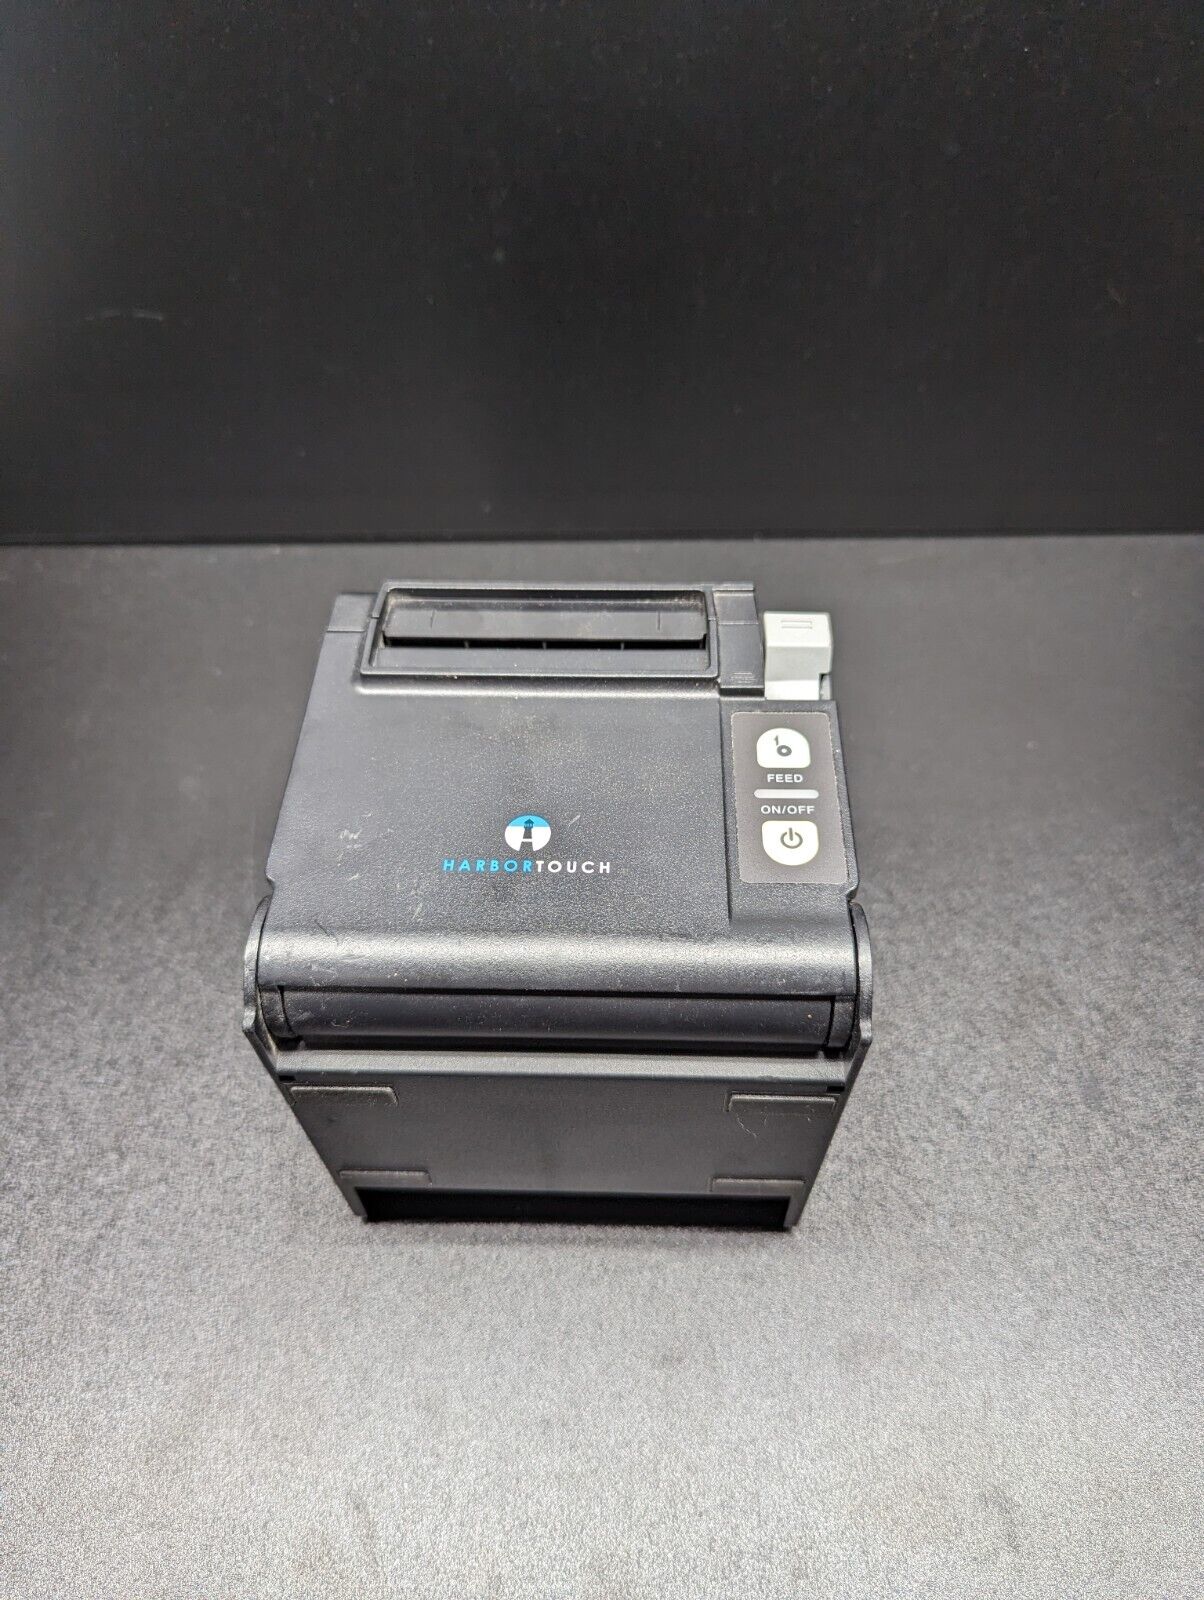 SII SEIKO RP-D10 Thermal POS Receipt Printer No Cables, Tested Works Well